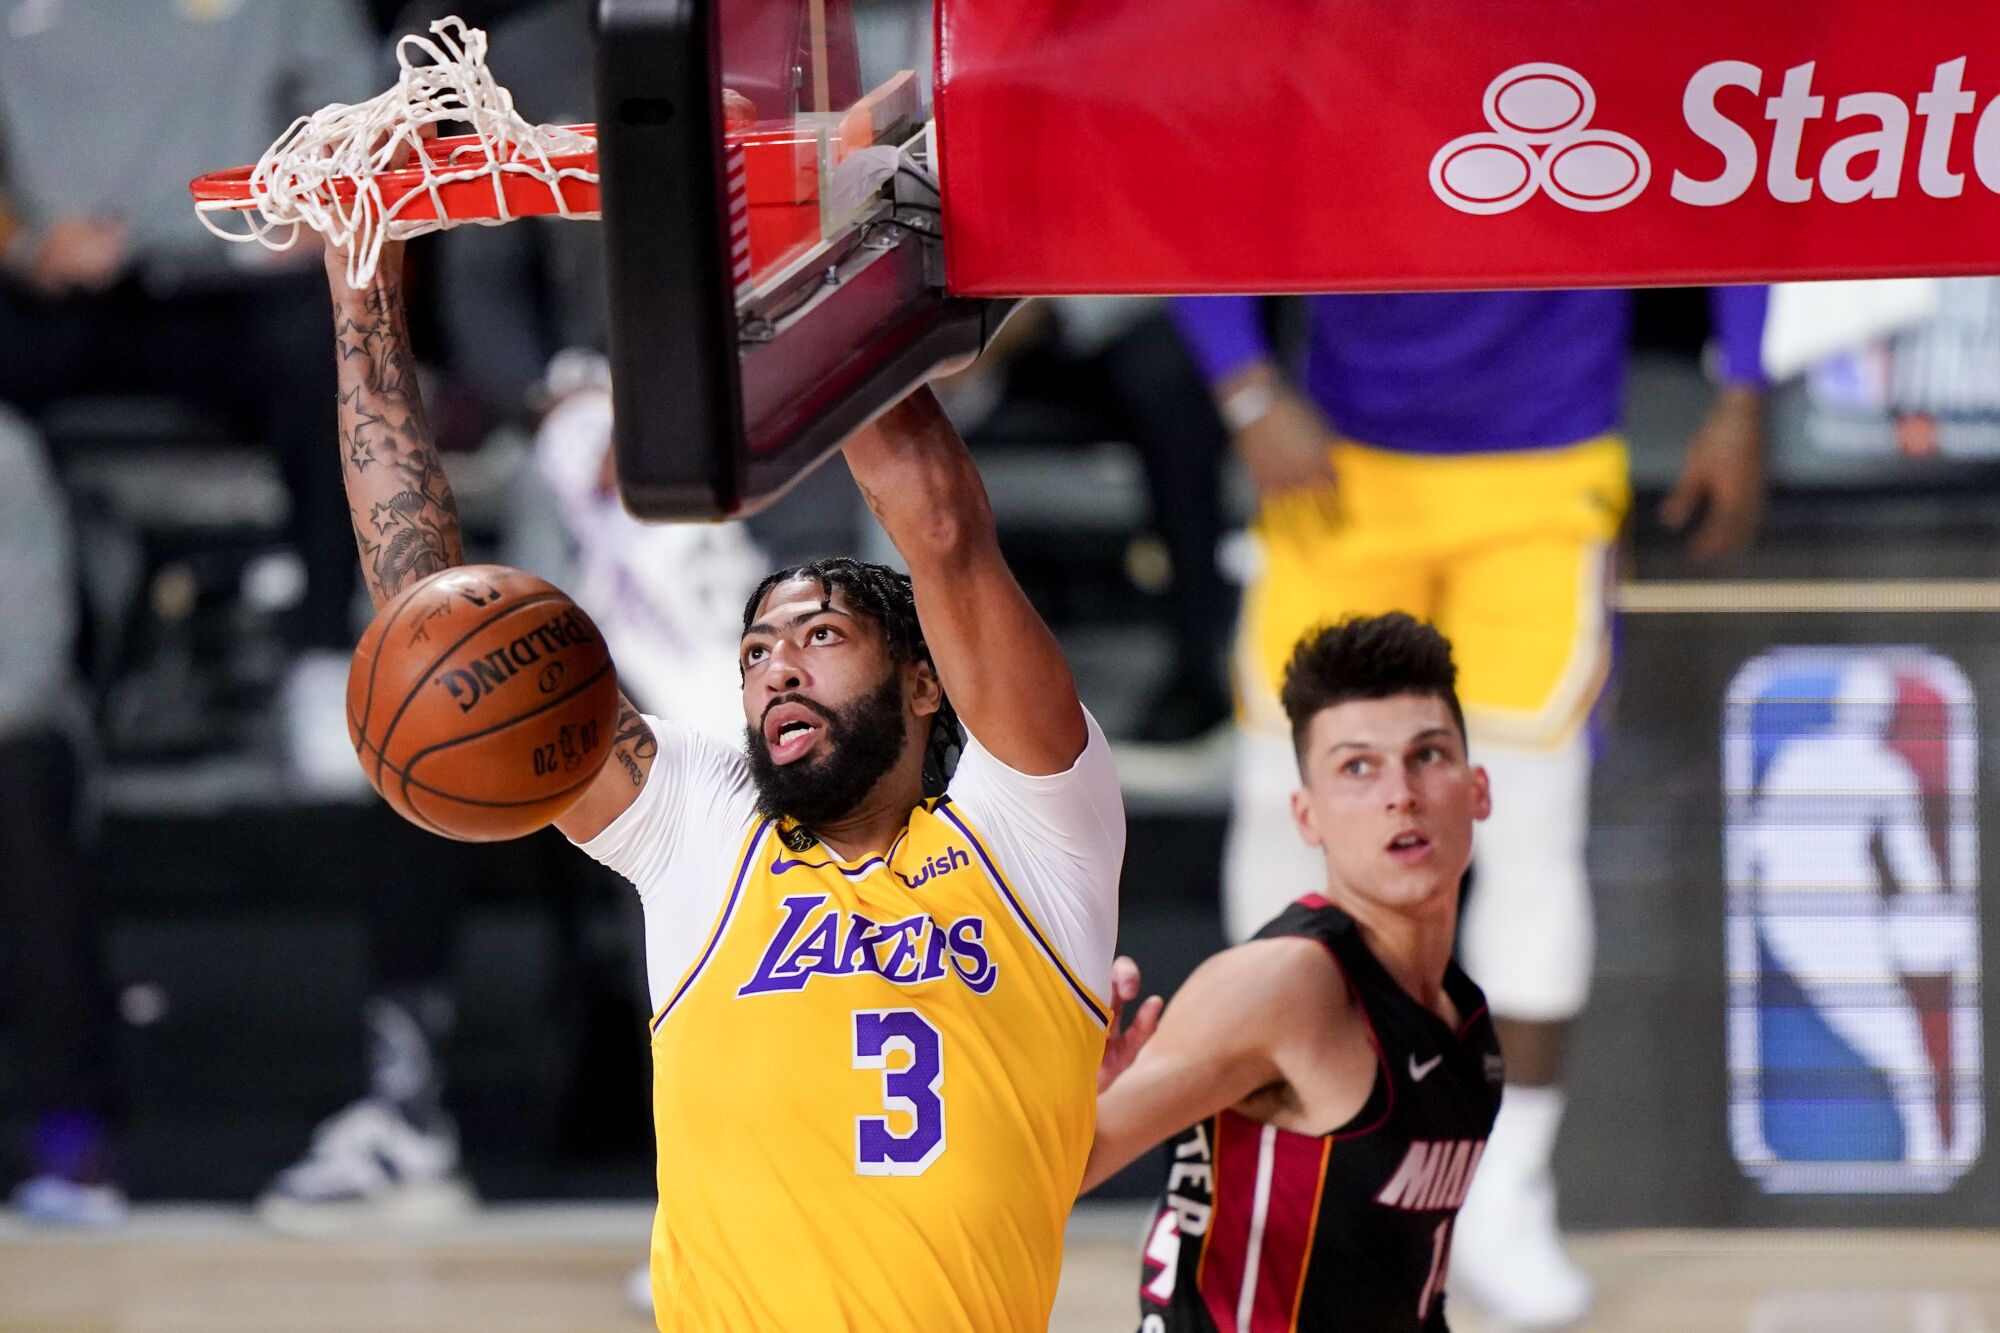 Lakers forward Anthony Davis throws down a dunk against the Heat early in Game 4 on Tuesday night.